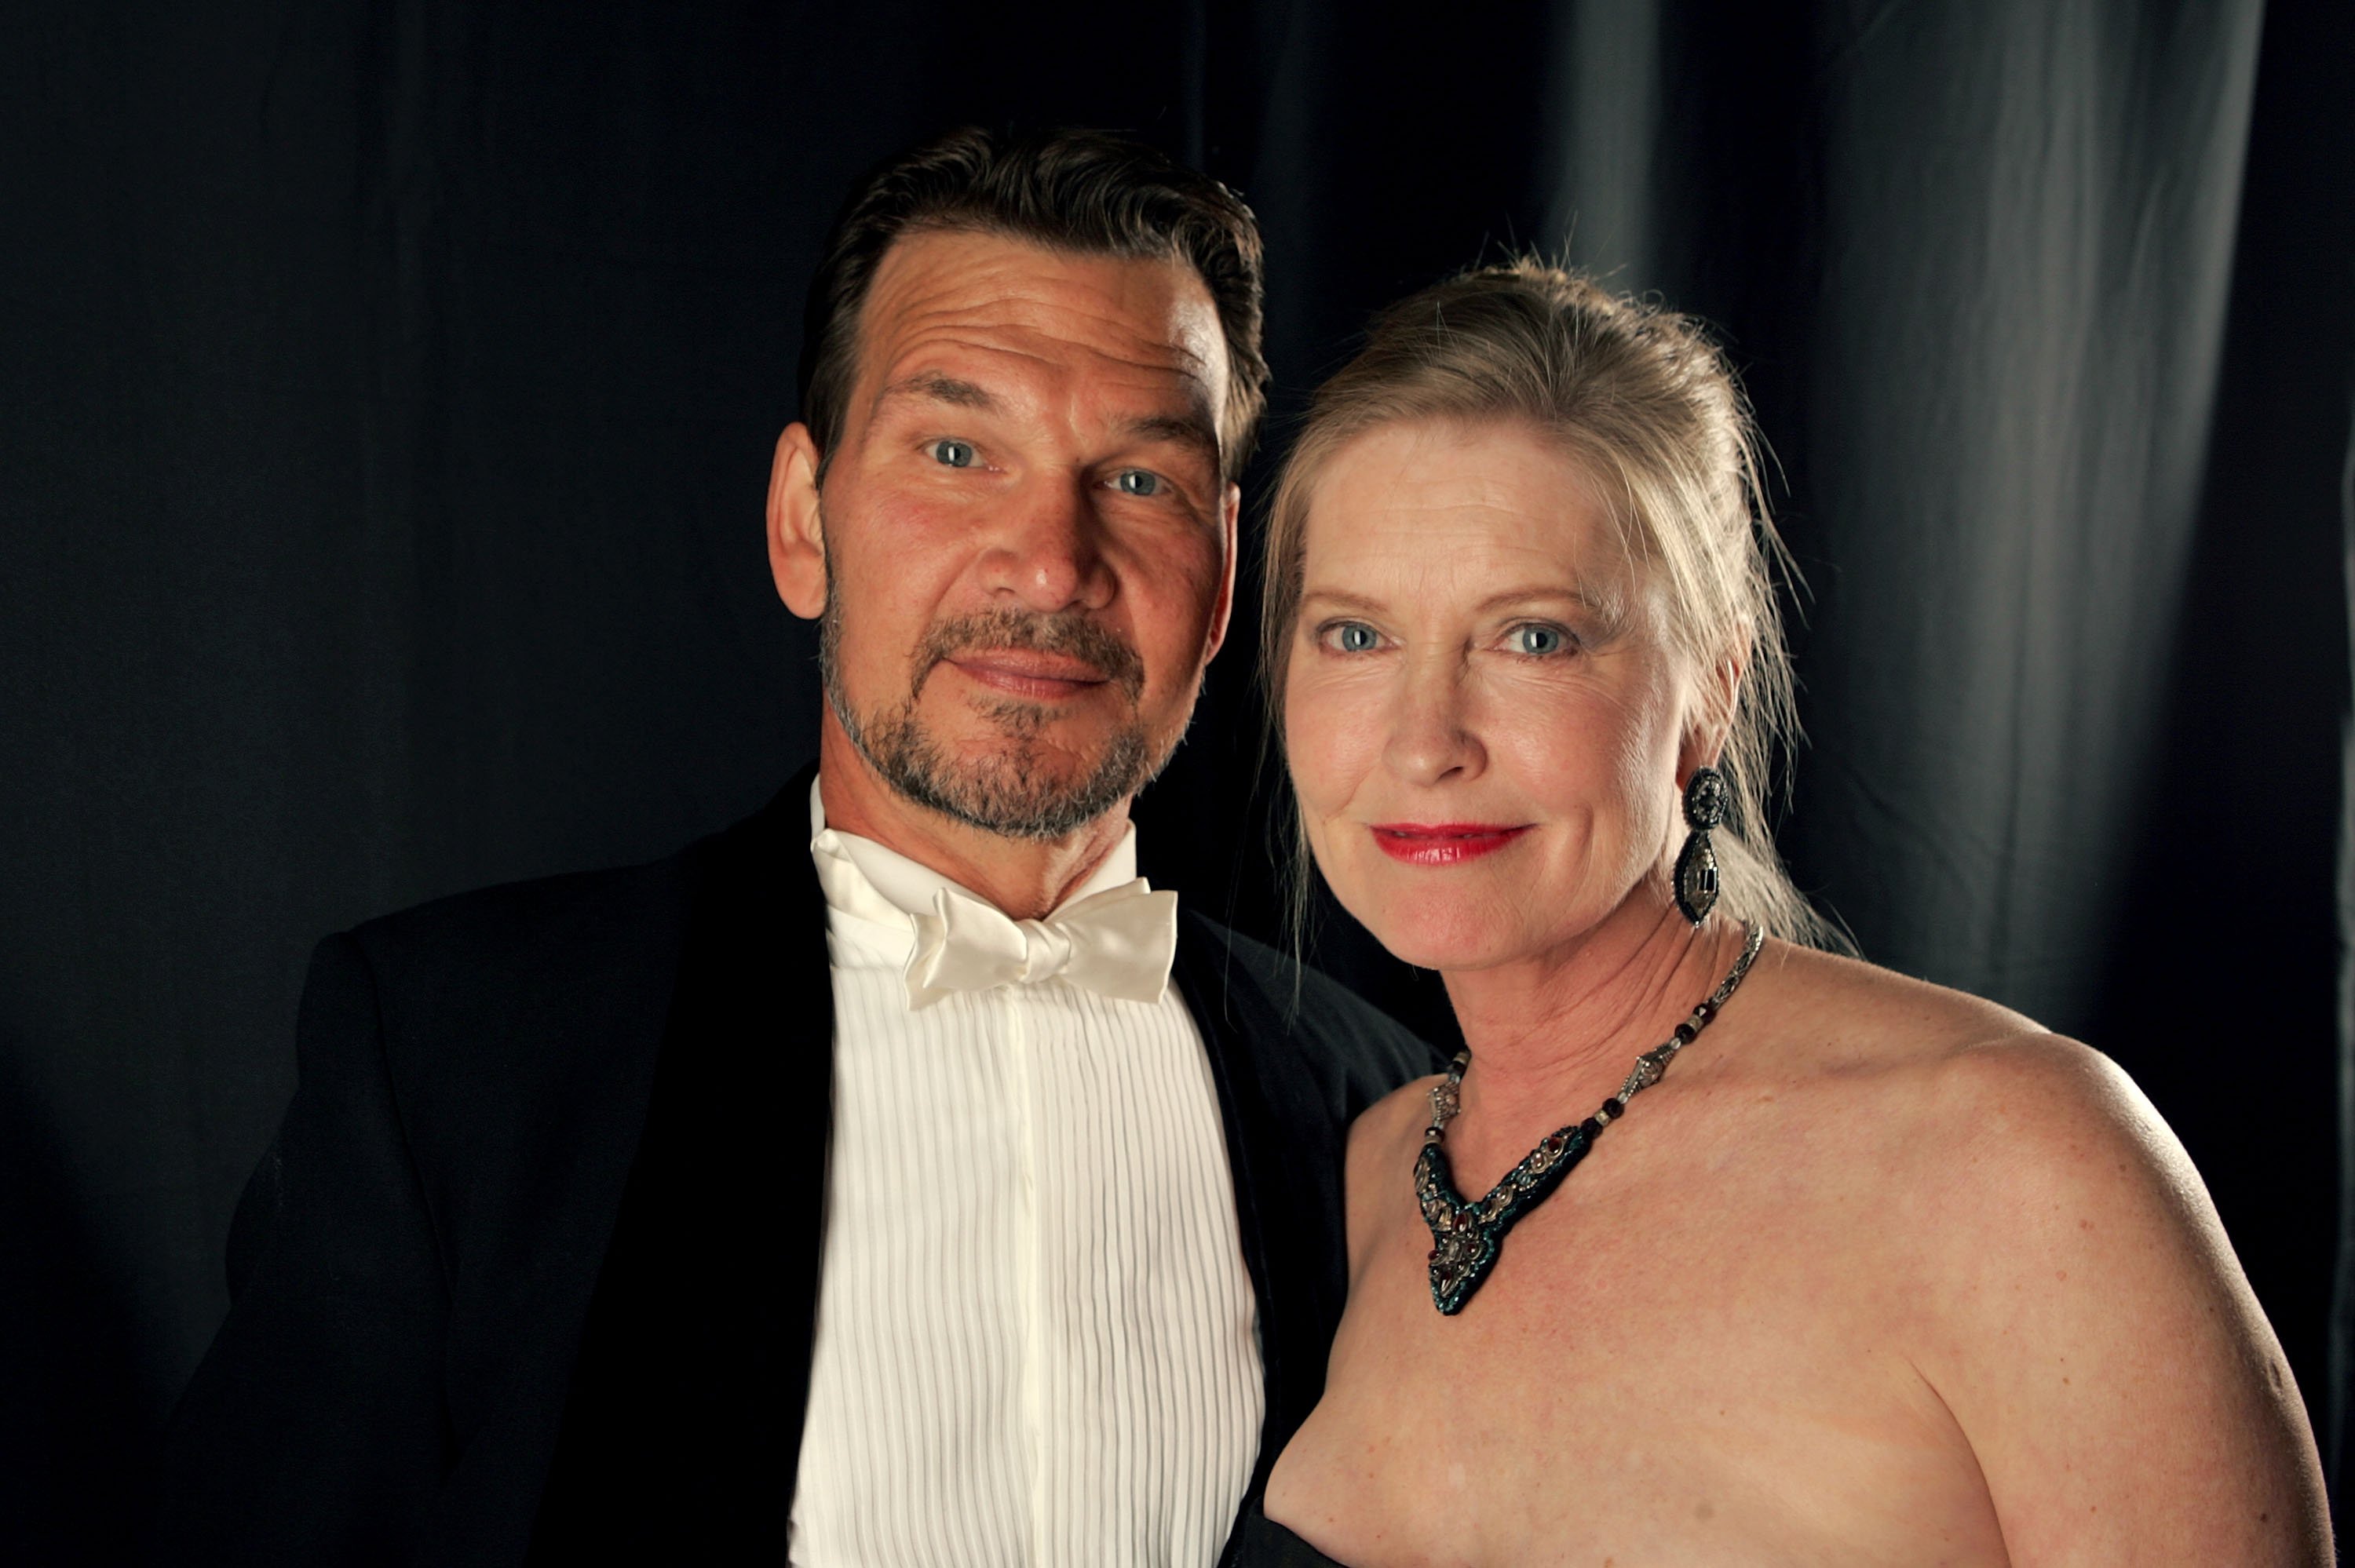  Patrick Swayze  and wife Lisa Niemi pose backstage during the 9th annual Costume Designers Guild Awards held at the Beverly Wilshire Hotel on February 17, 2007 | Photo: GettyImages